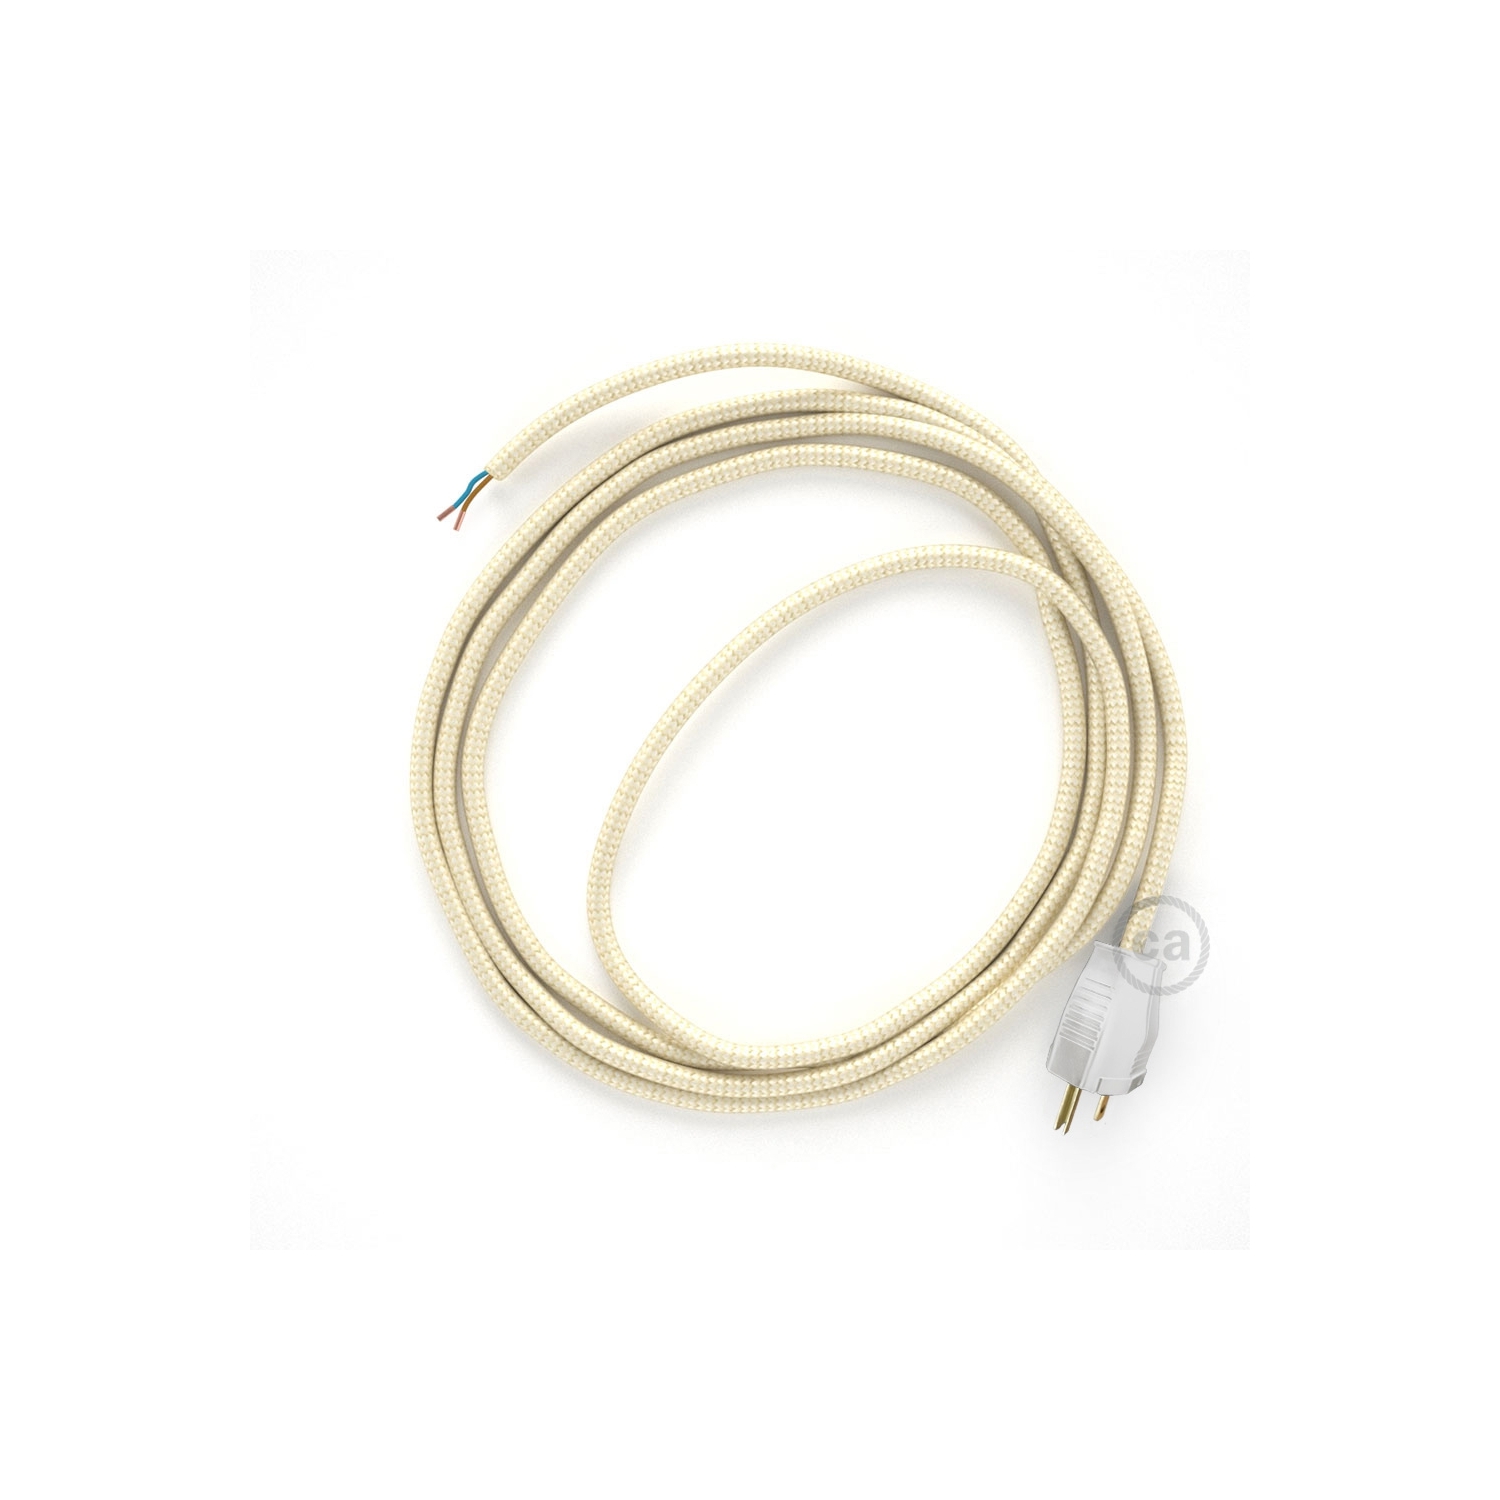 Cord-set - RM00 Ivory Rayon Covered Round Cable